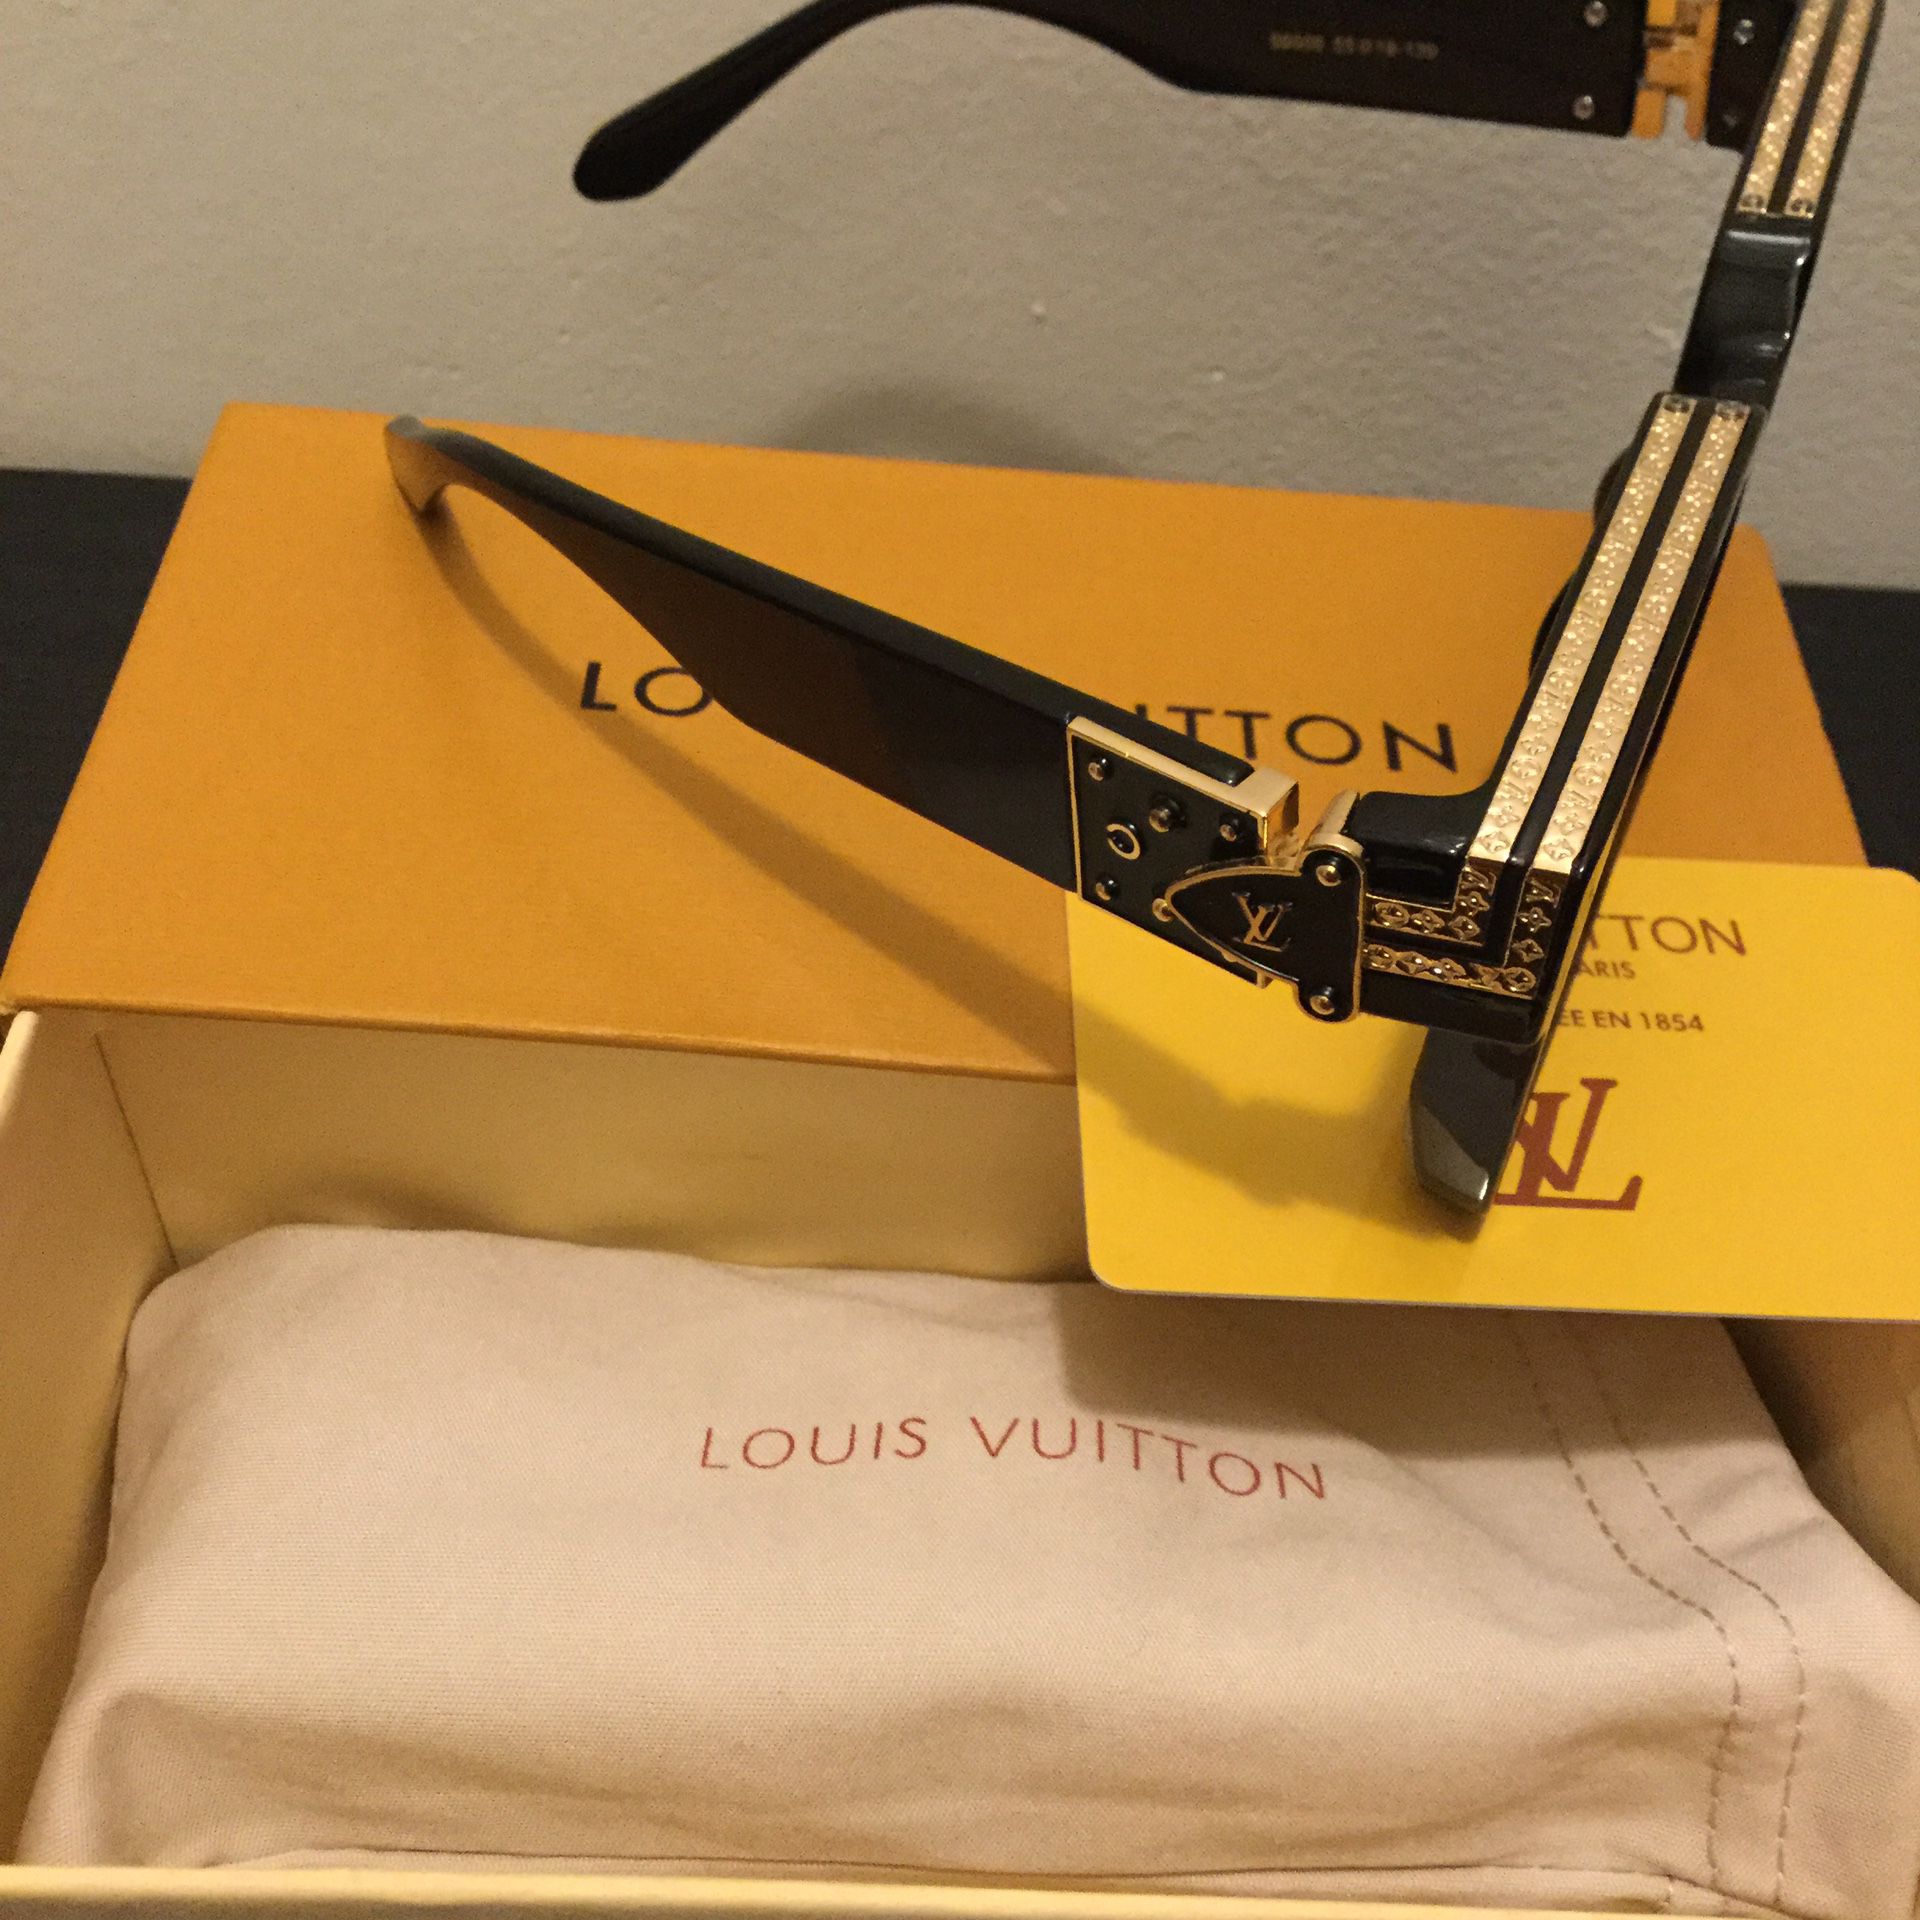 Louisvuitton sunglasses with case and accessories